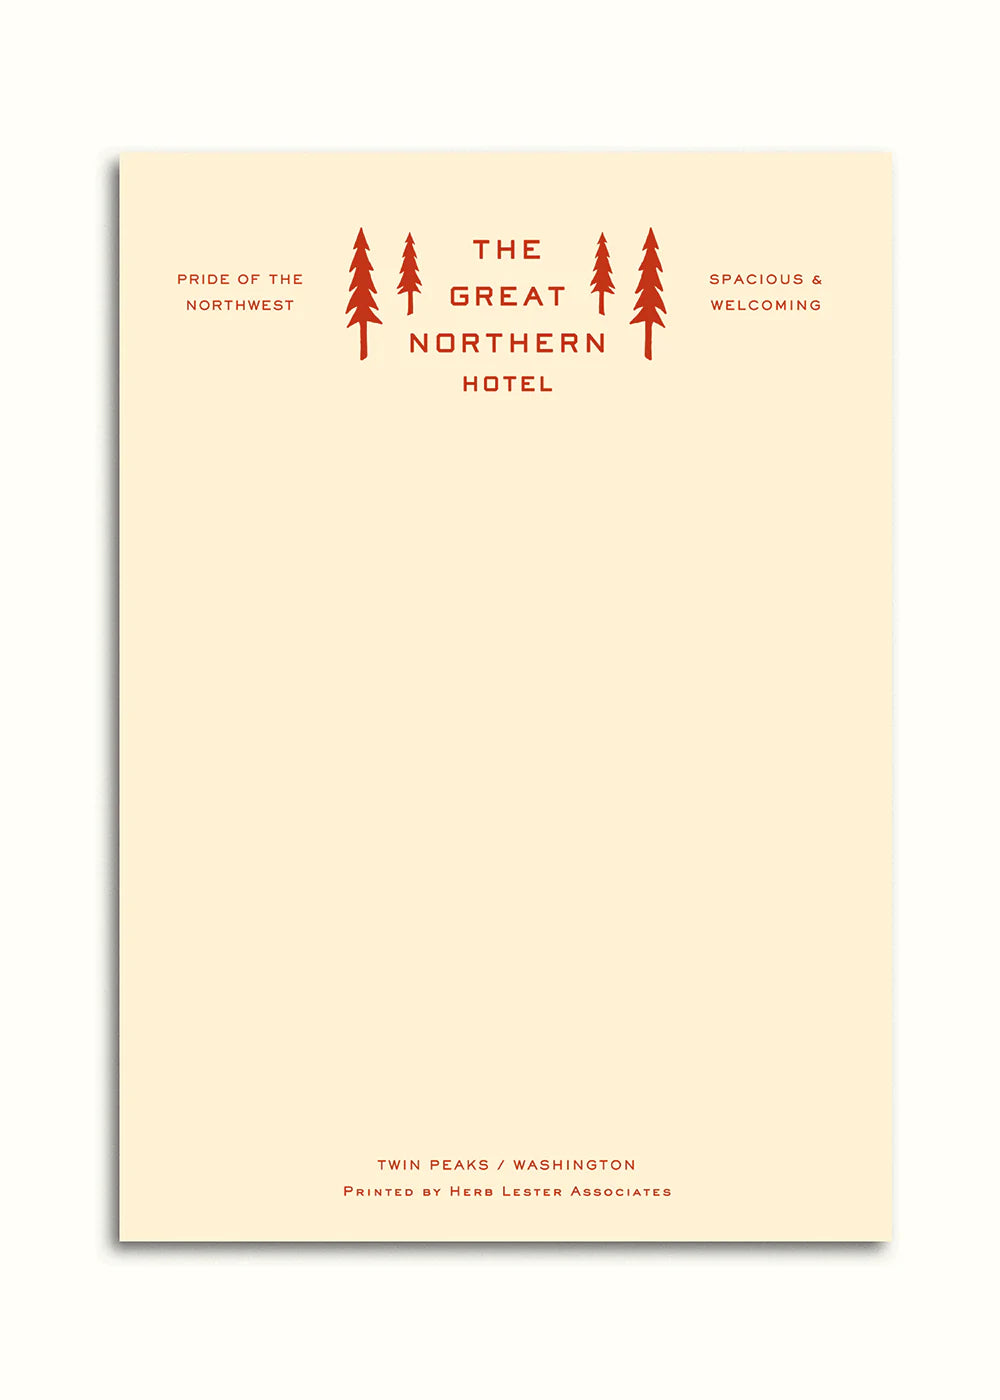 Fictional Hotel Notepad: The Great Northern Hotel